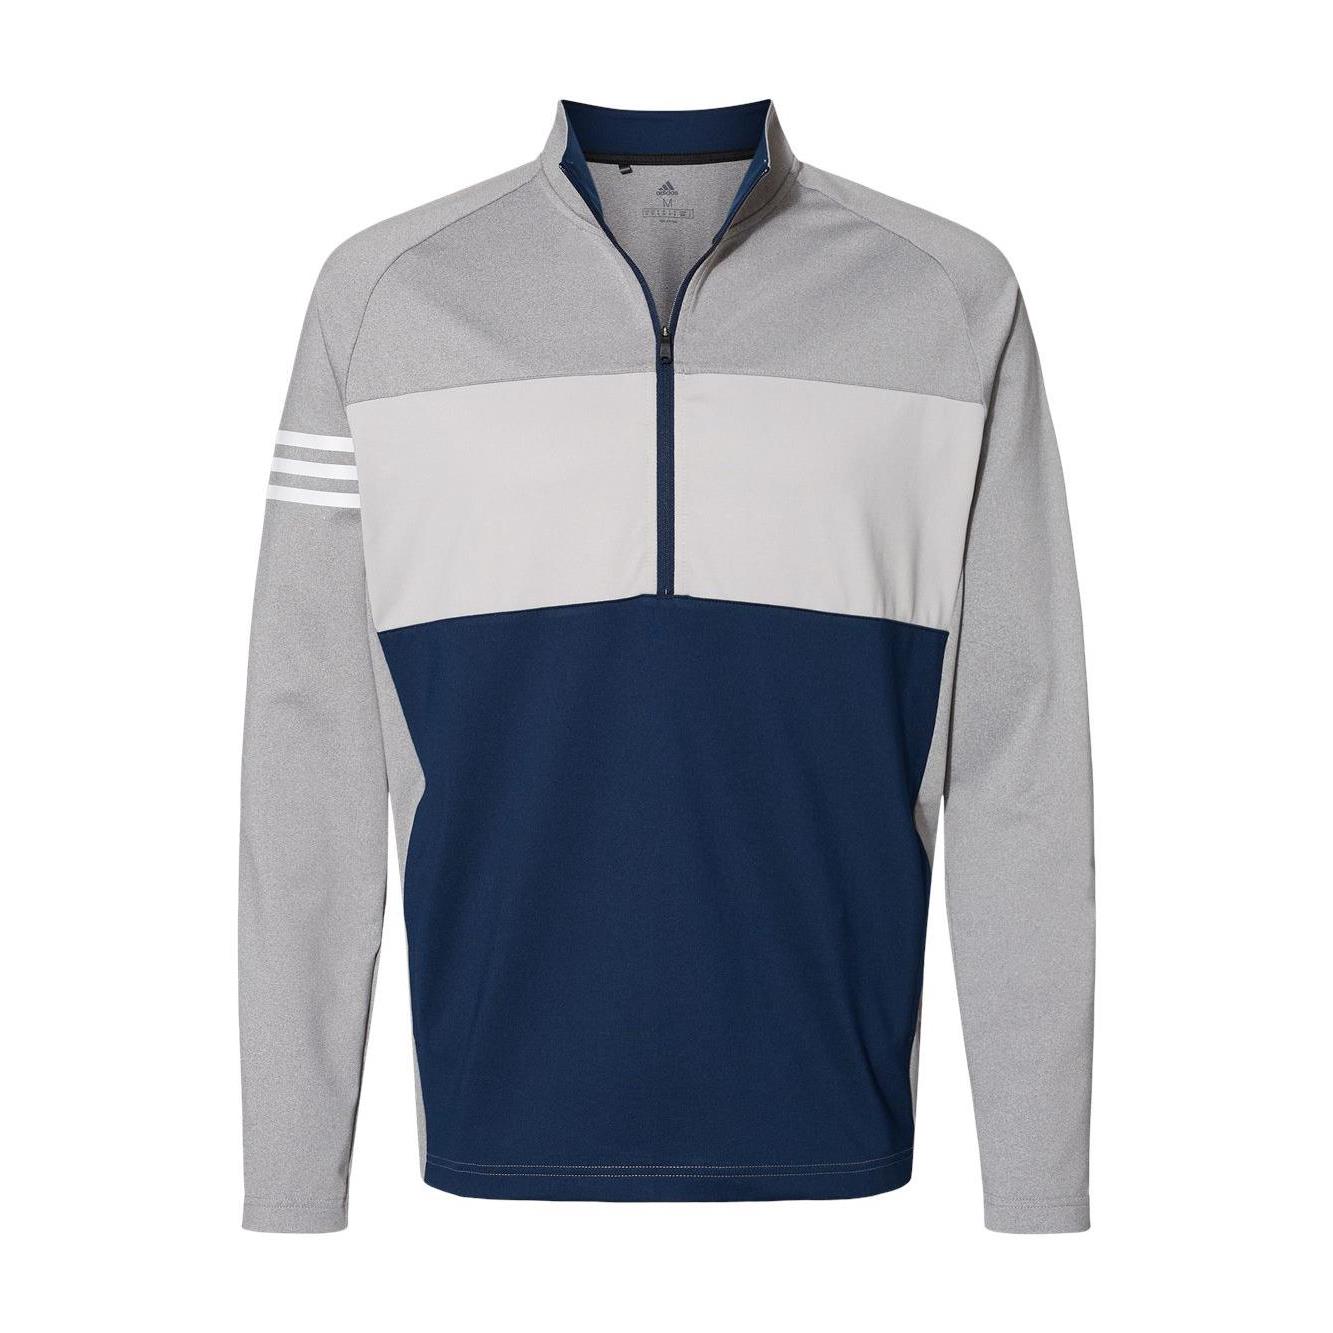 Adidas - 3-Stripes Competition Quarter-zip Pullover - A492 Collegiate Navy/ Grey Three Heather/ Grey Two